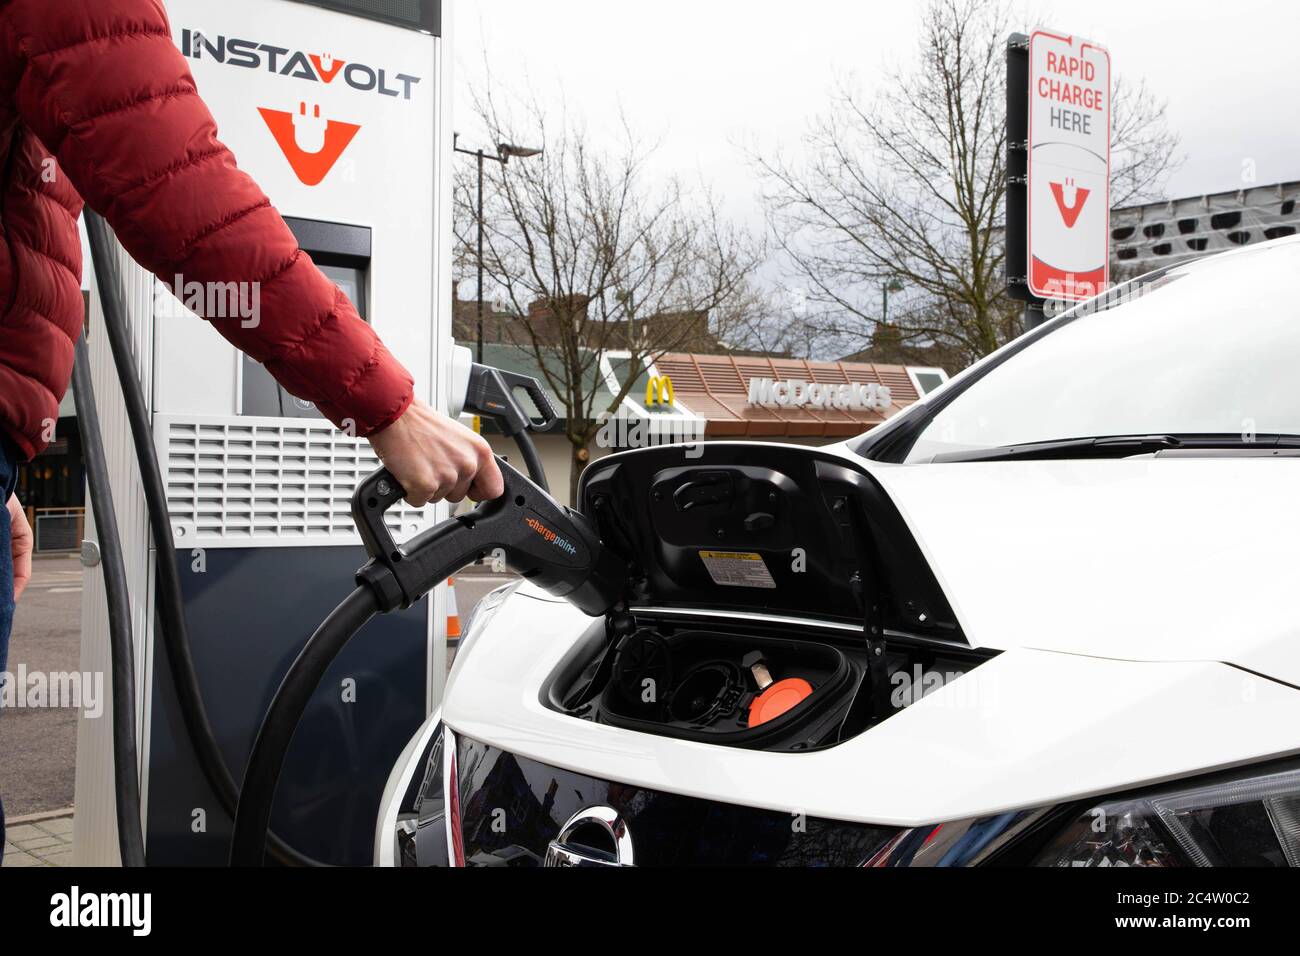 General view of an InstaVolt charger in a McDonald’s carpark, as the food chain announces plans to introduce electric vehicle (EV) rapid charging points as standard across new UK Drive-Thru restaurants, London. Stock Photo